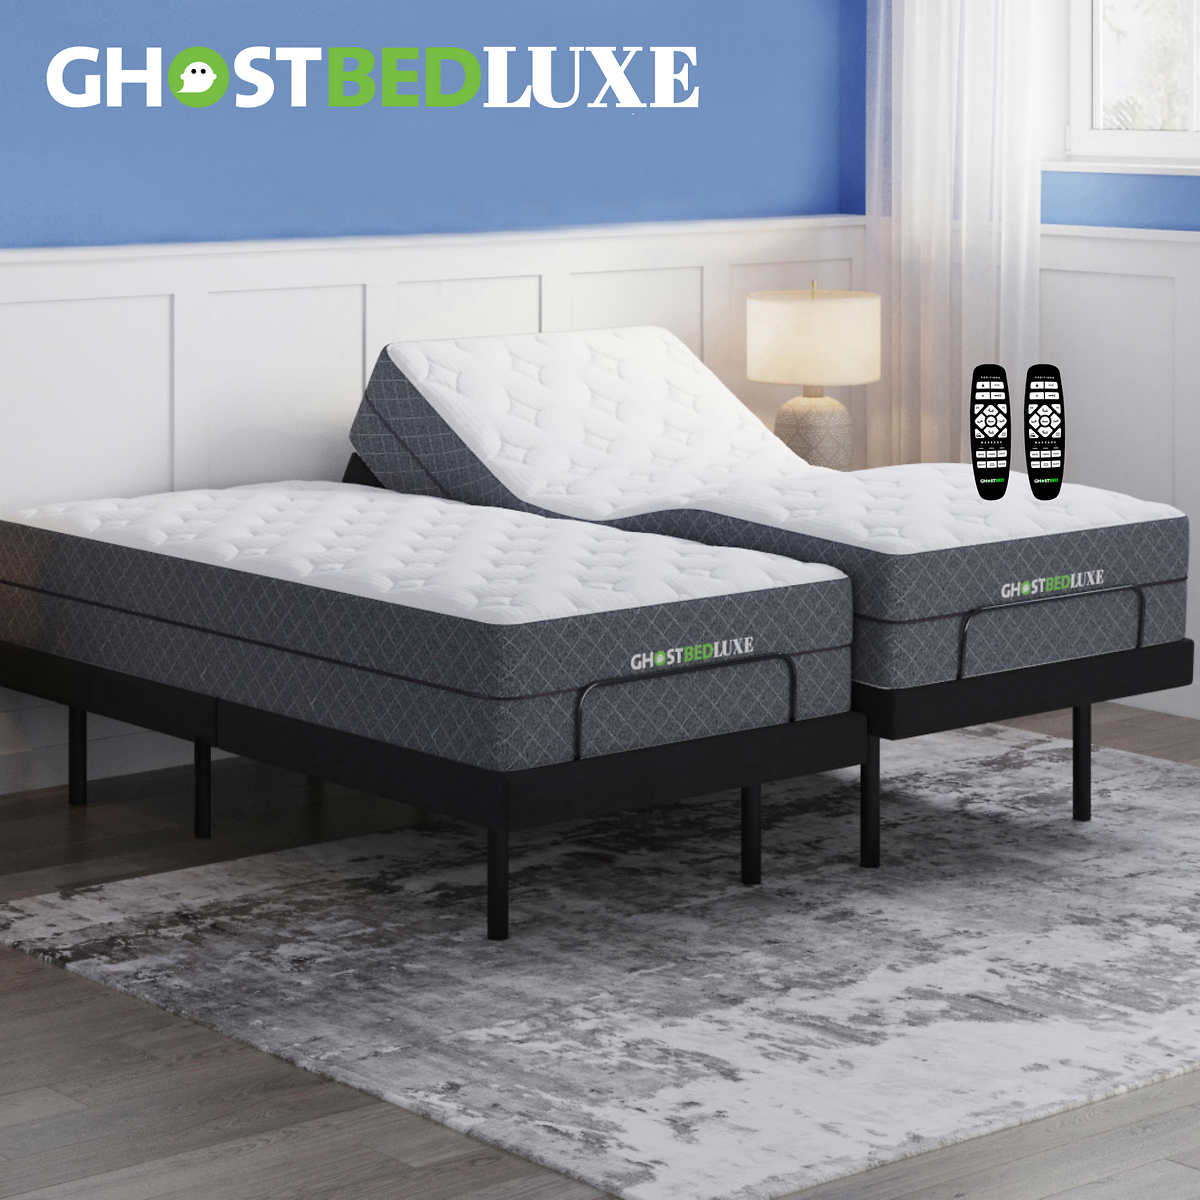 GhostBed Luxe 33 cm (13 in.) Memory Foam Mattress with Cooling Technology  with Adjustable Base